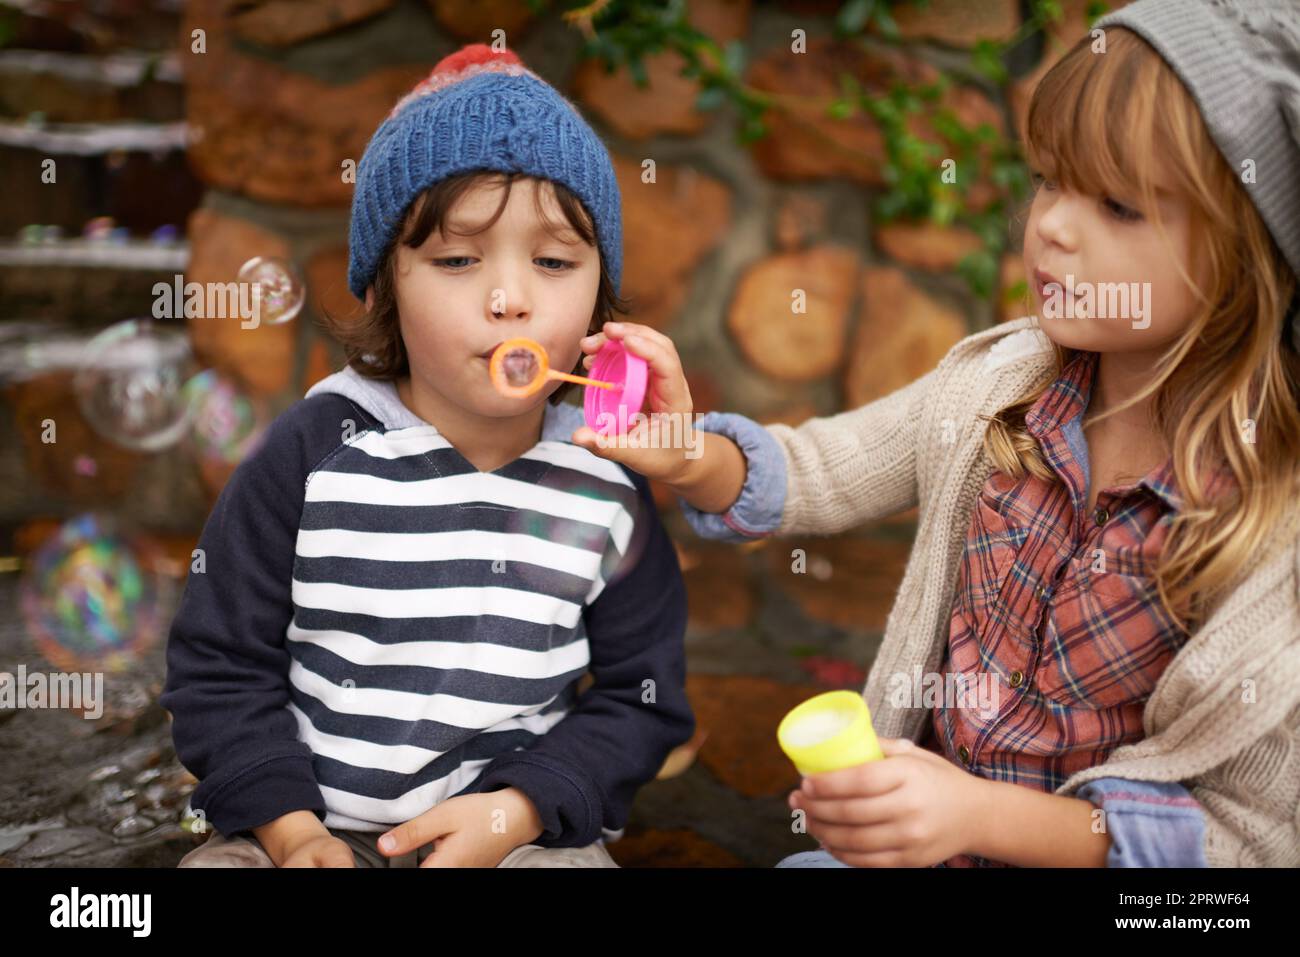 Showing him how its done. two cute kids blowing bubbles together outdoors. Stock Photo